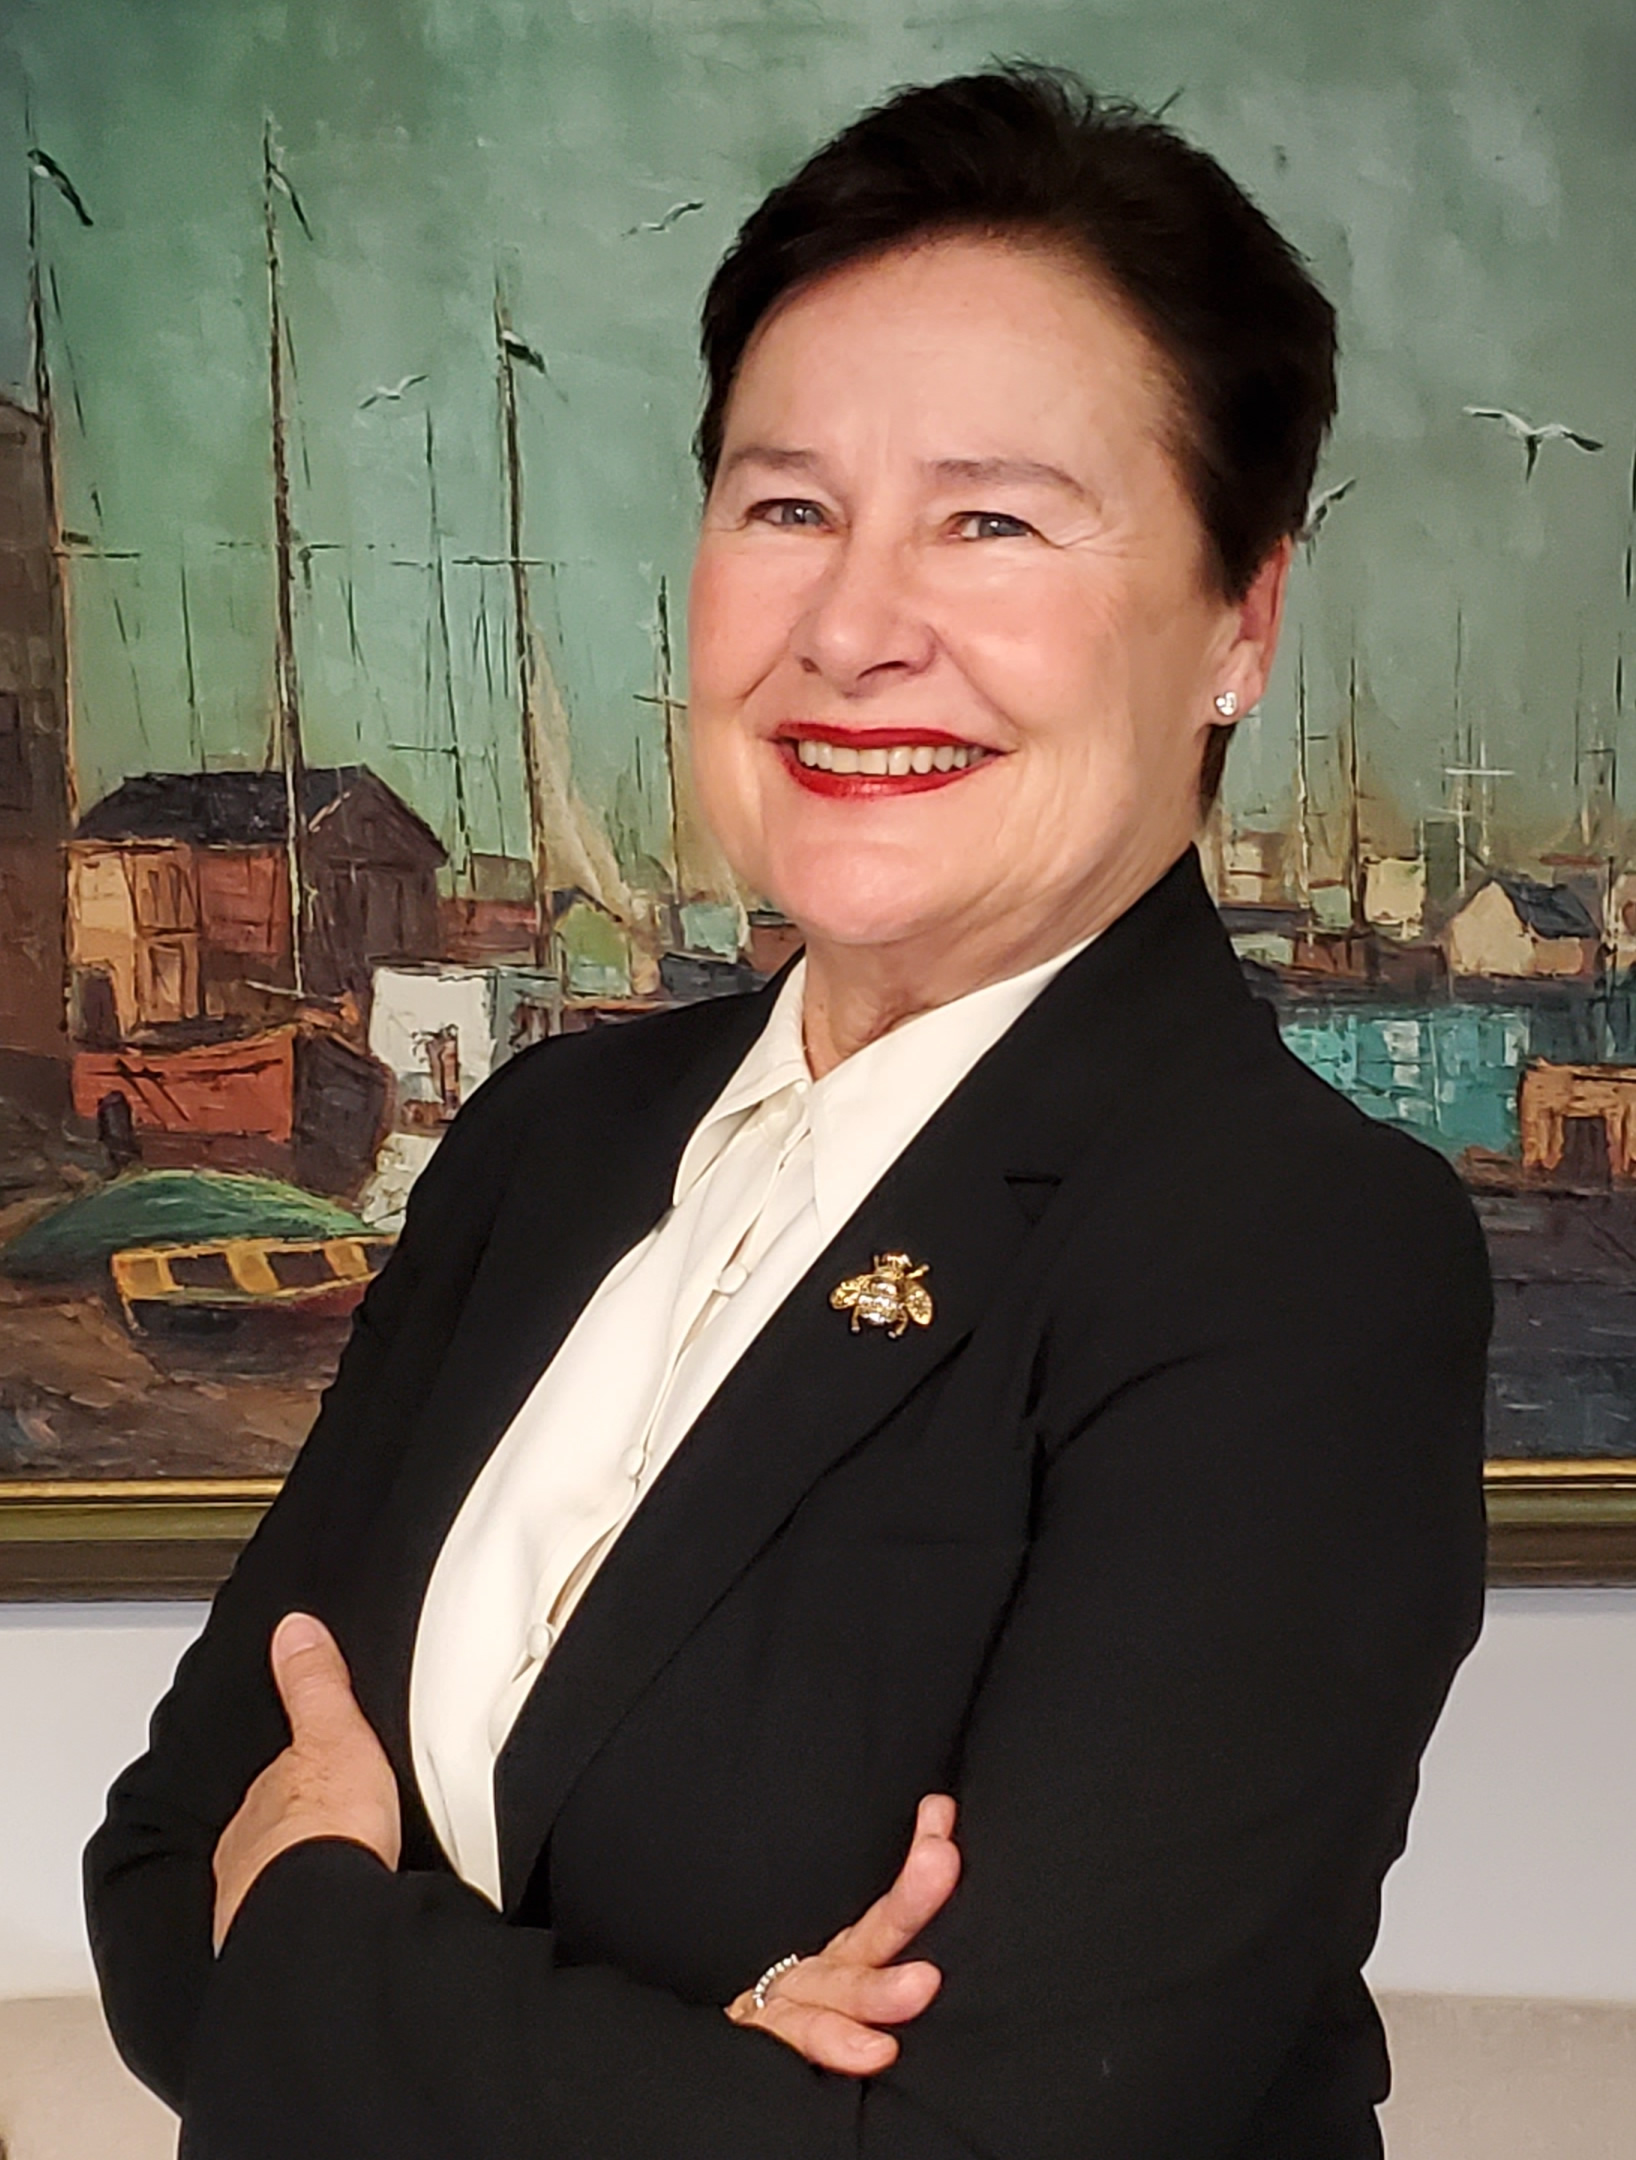 Hilary C. McCormack, Chairperson